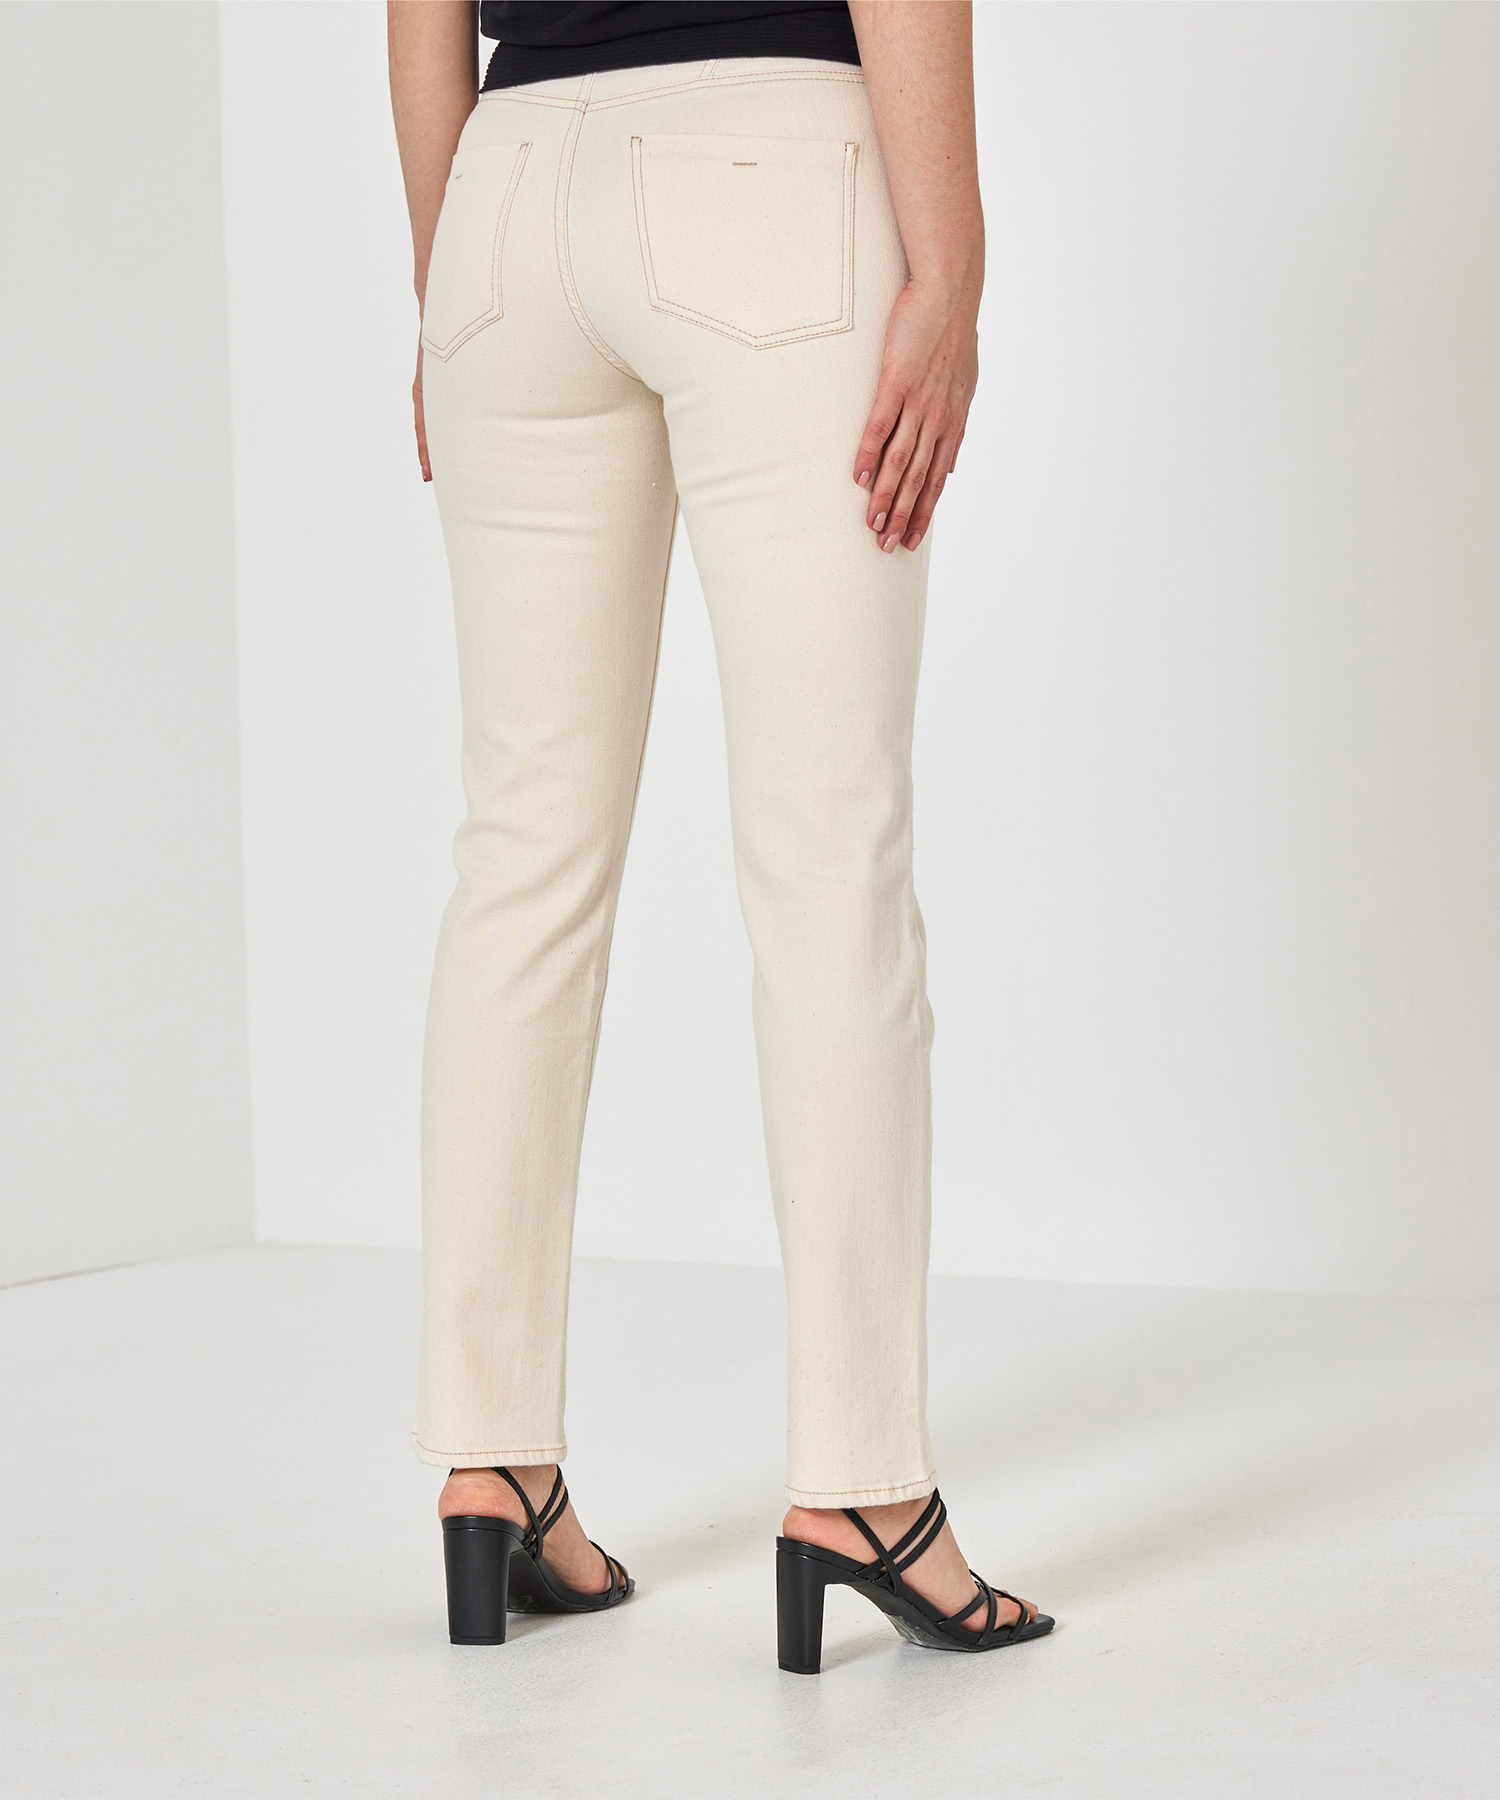 Rosner straight jeans Audrey